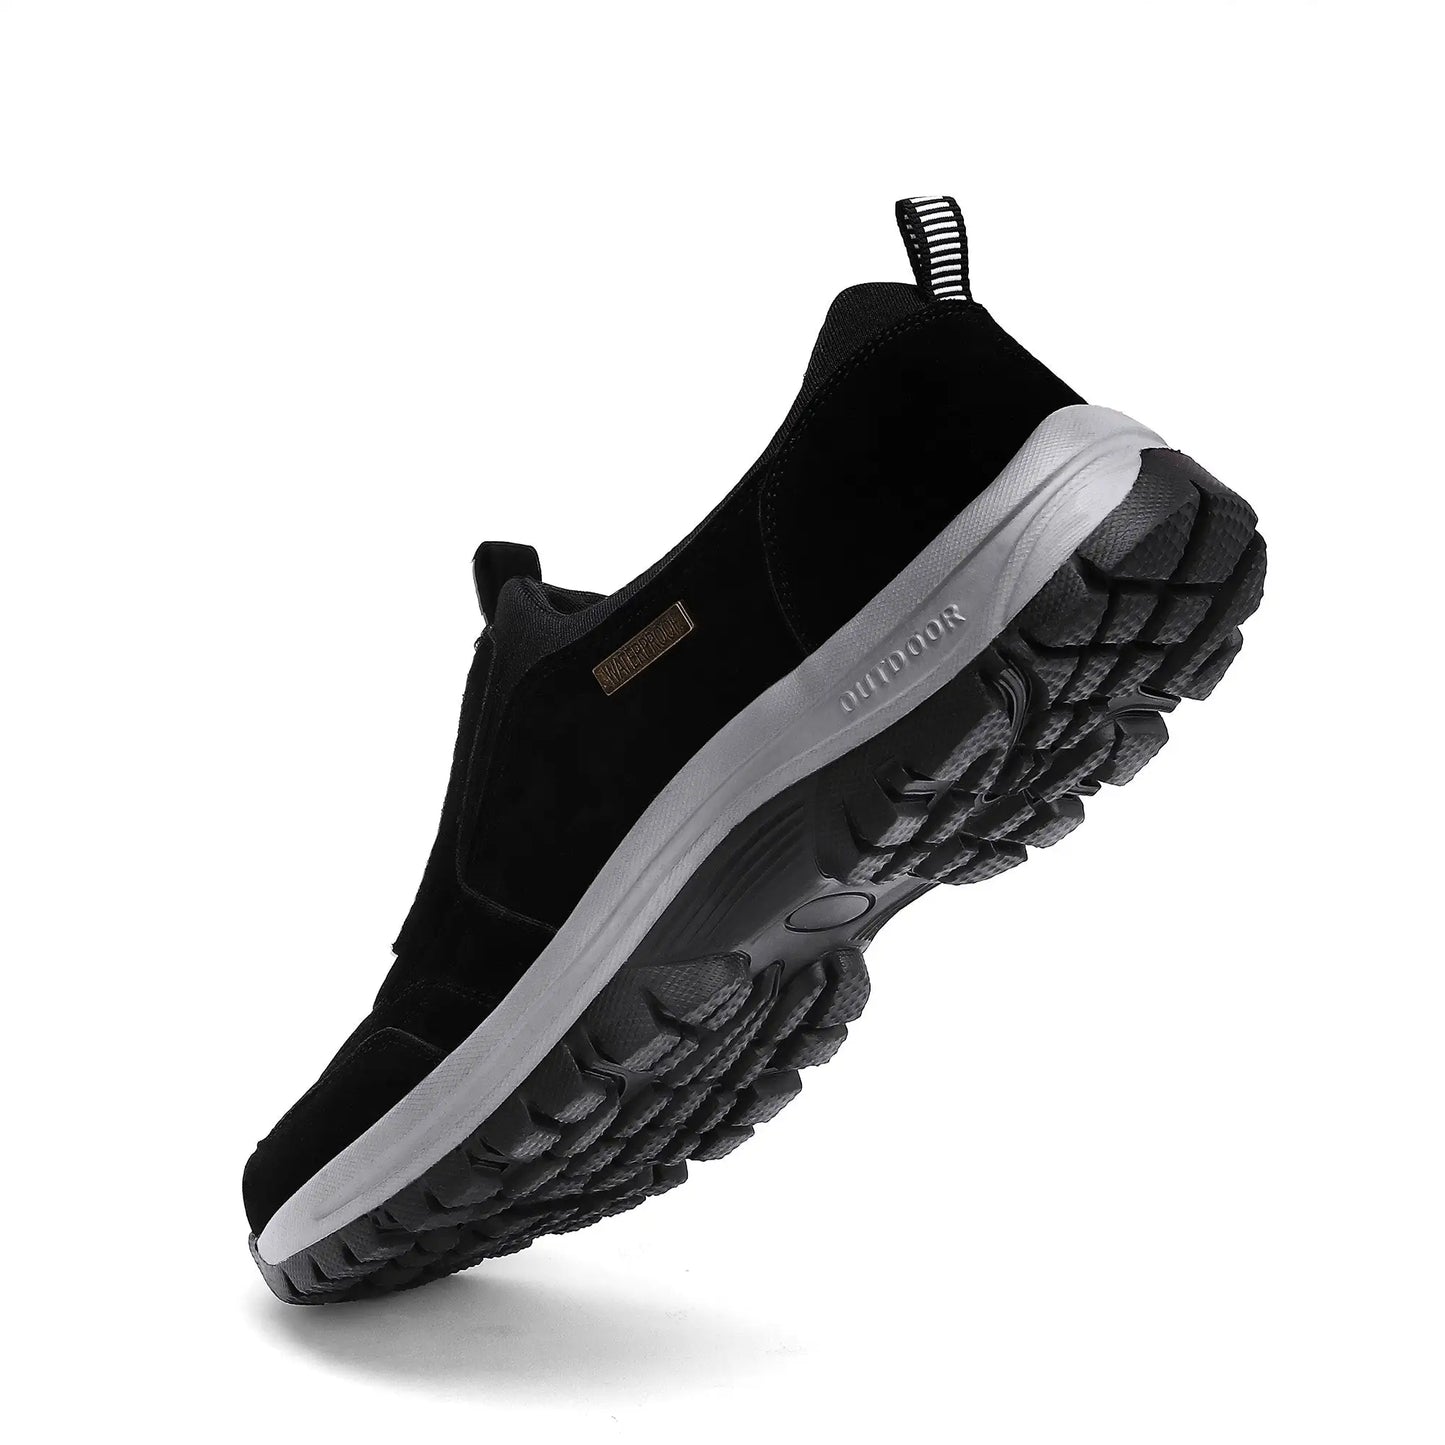 Last Day Promotion 50% OFF Men's Comfortable Hands Free Slip-on Shoes